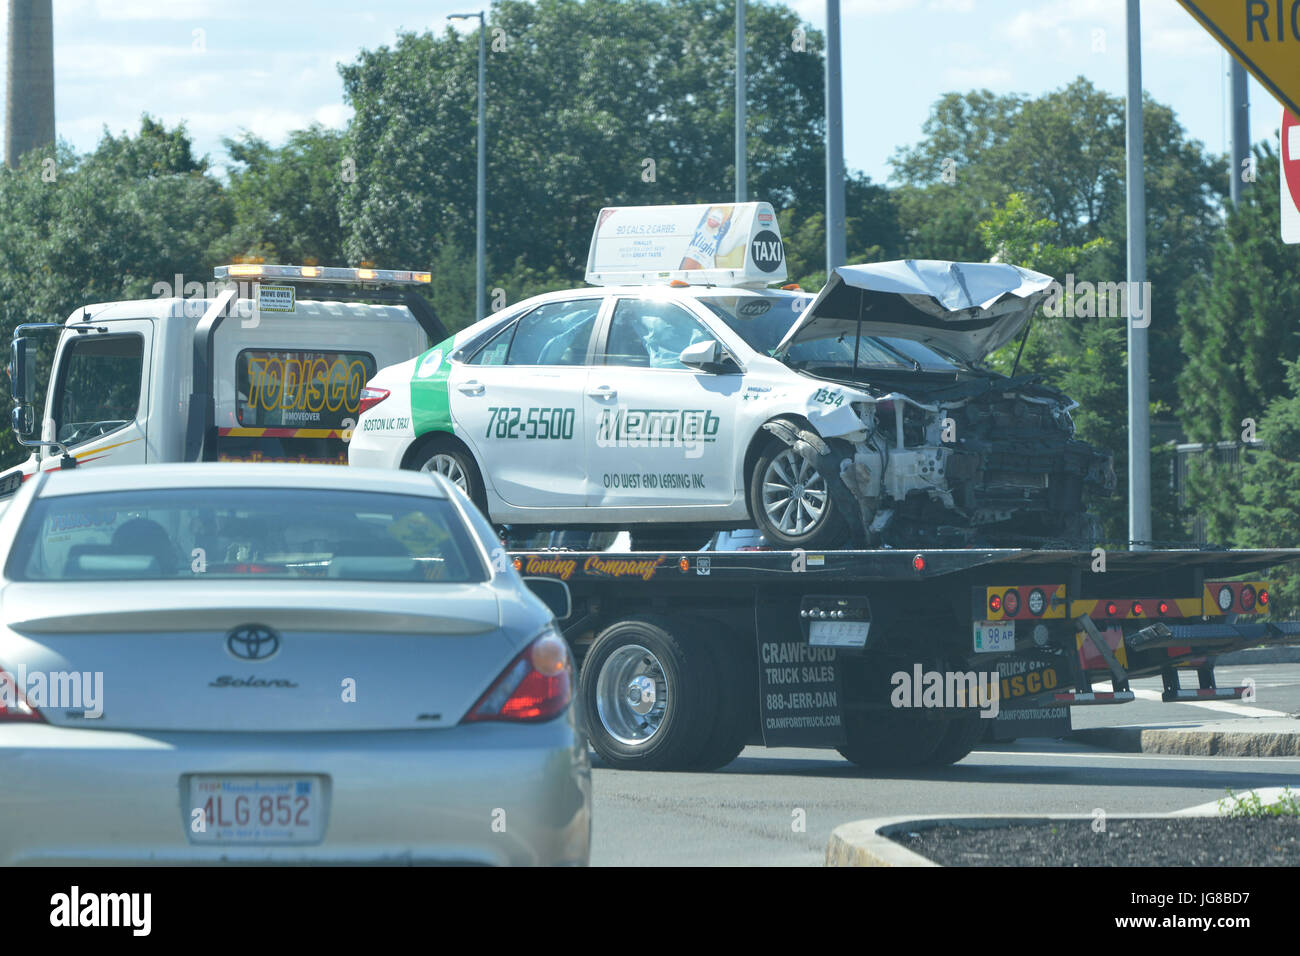 Boston, Massachusetts, USA. 17th June, 2017. Ten cabbies were injured, one seriously, as another cab driver drove into them at the Logan Airport Taxi pool area near Porter Street and Tomahawk Drive in East Boston.Police are ruling out terrorism at this point. The driver was reported to have said the Toyota Camry taxicab accelerated suddenly and was out of control. Credit: Kenneth Martin/ZUMA Wire/Alamy Live News Stock Photo